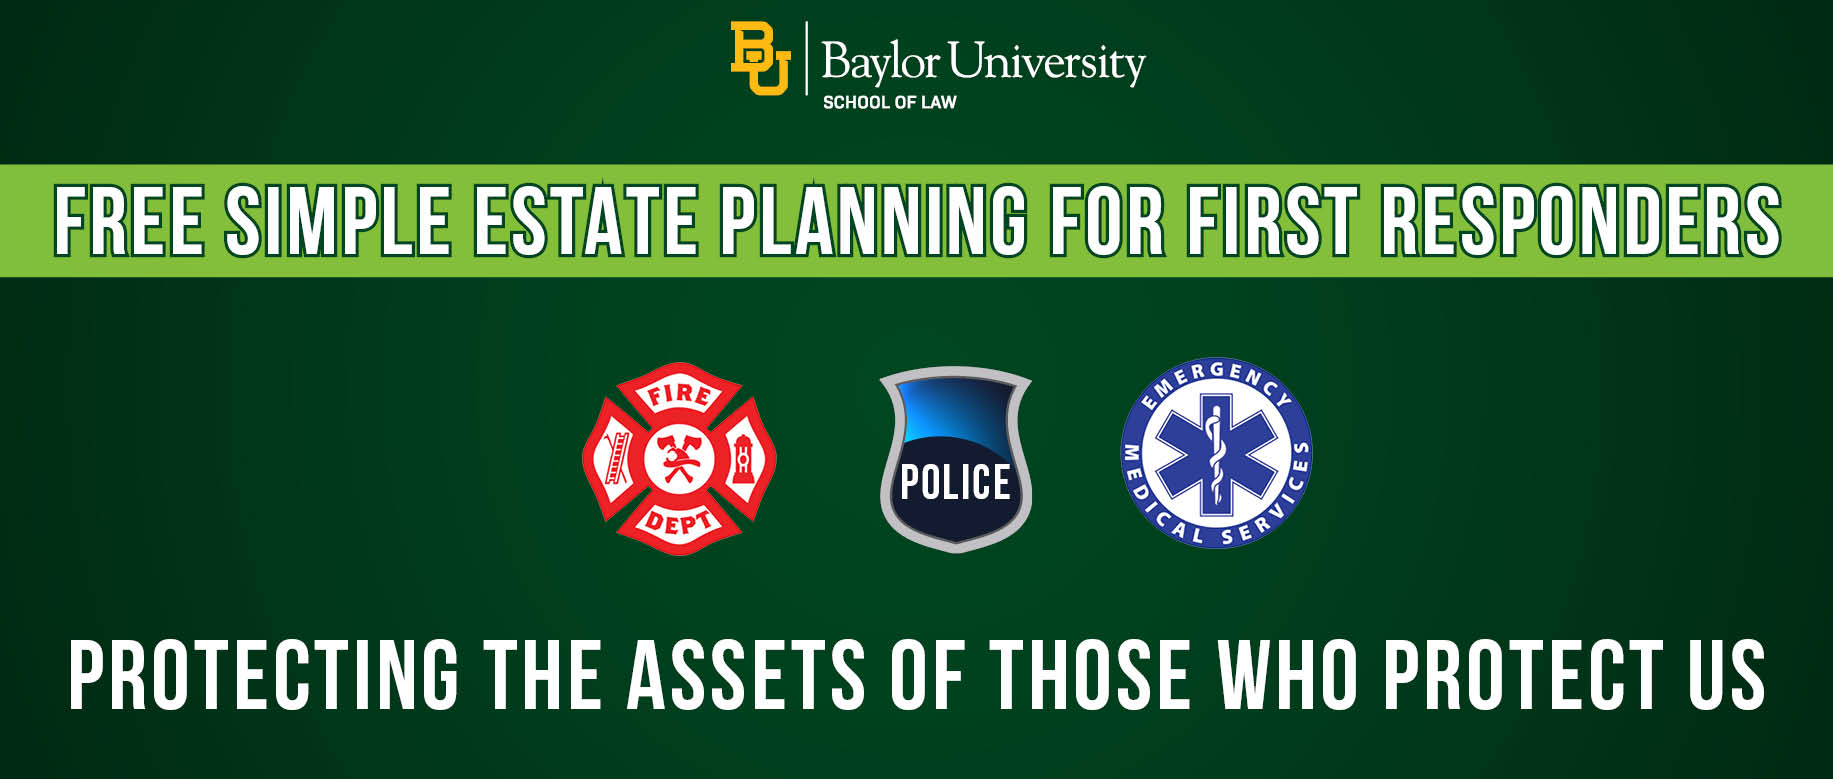 Banner advertising that Baylor Law Offers Free Wills for First Responders